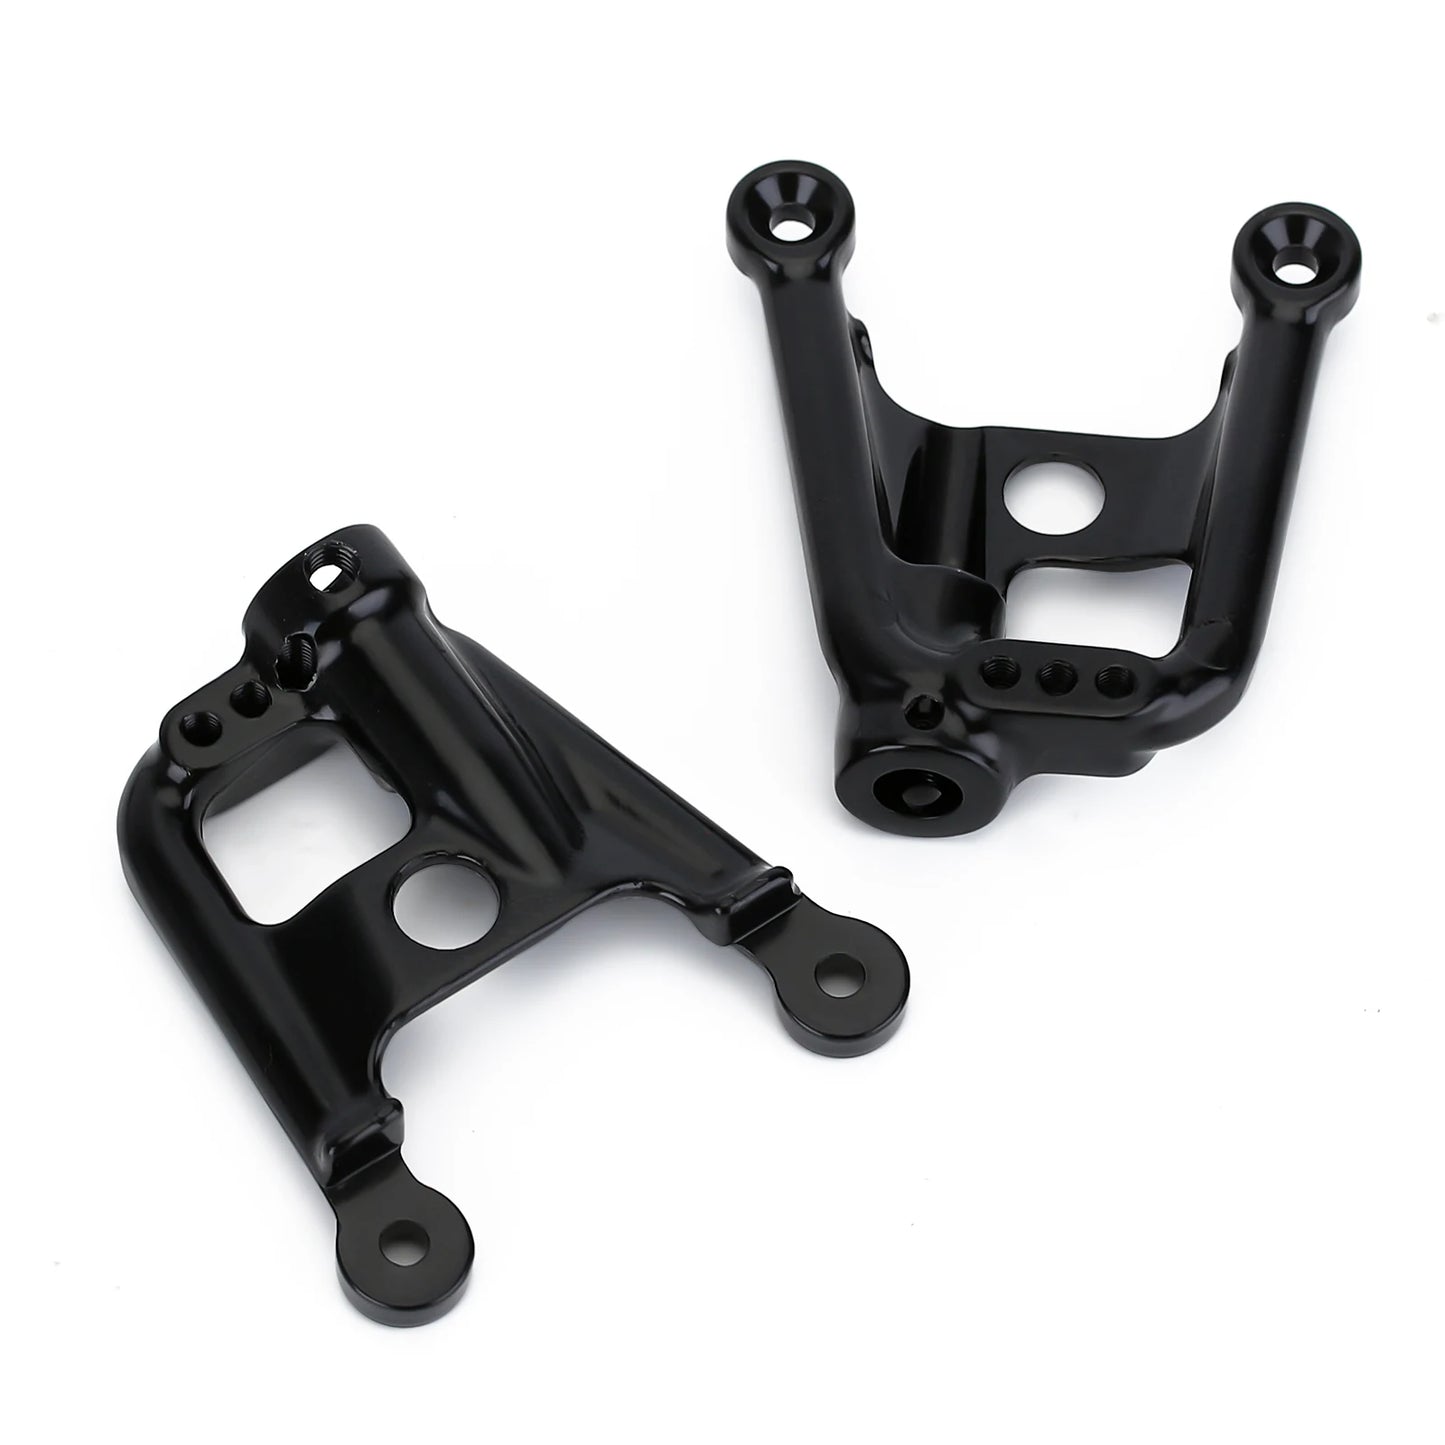 INJORA Heavy Duty Metal Front & Rear Shock Towers Mount For 1/10 RC Crawler Car Axial SCX10 II 90046 Upgrade Parts